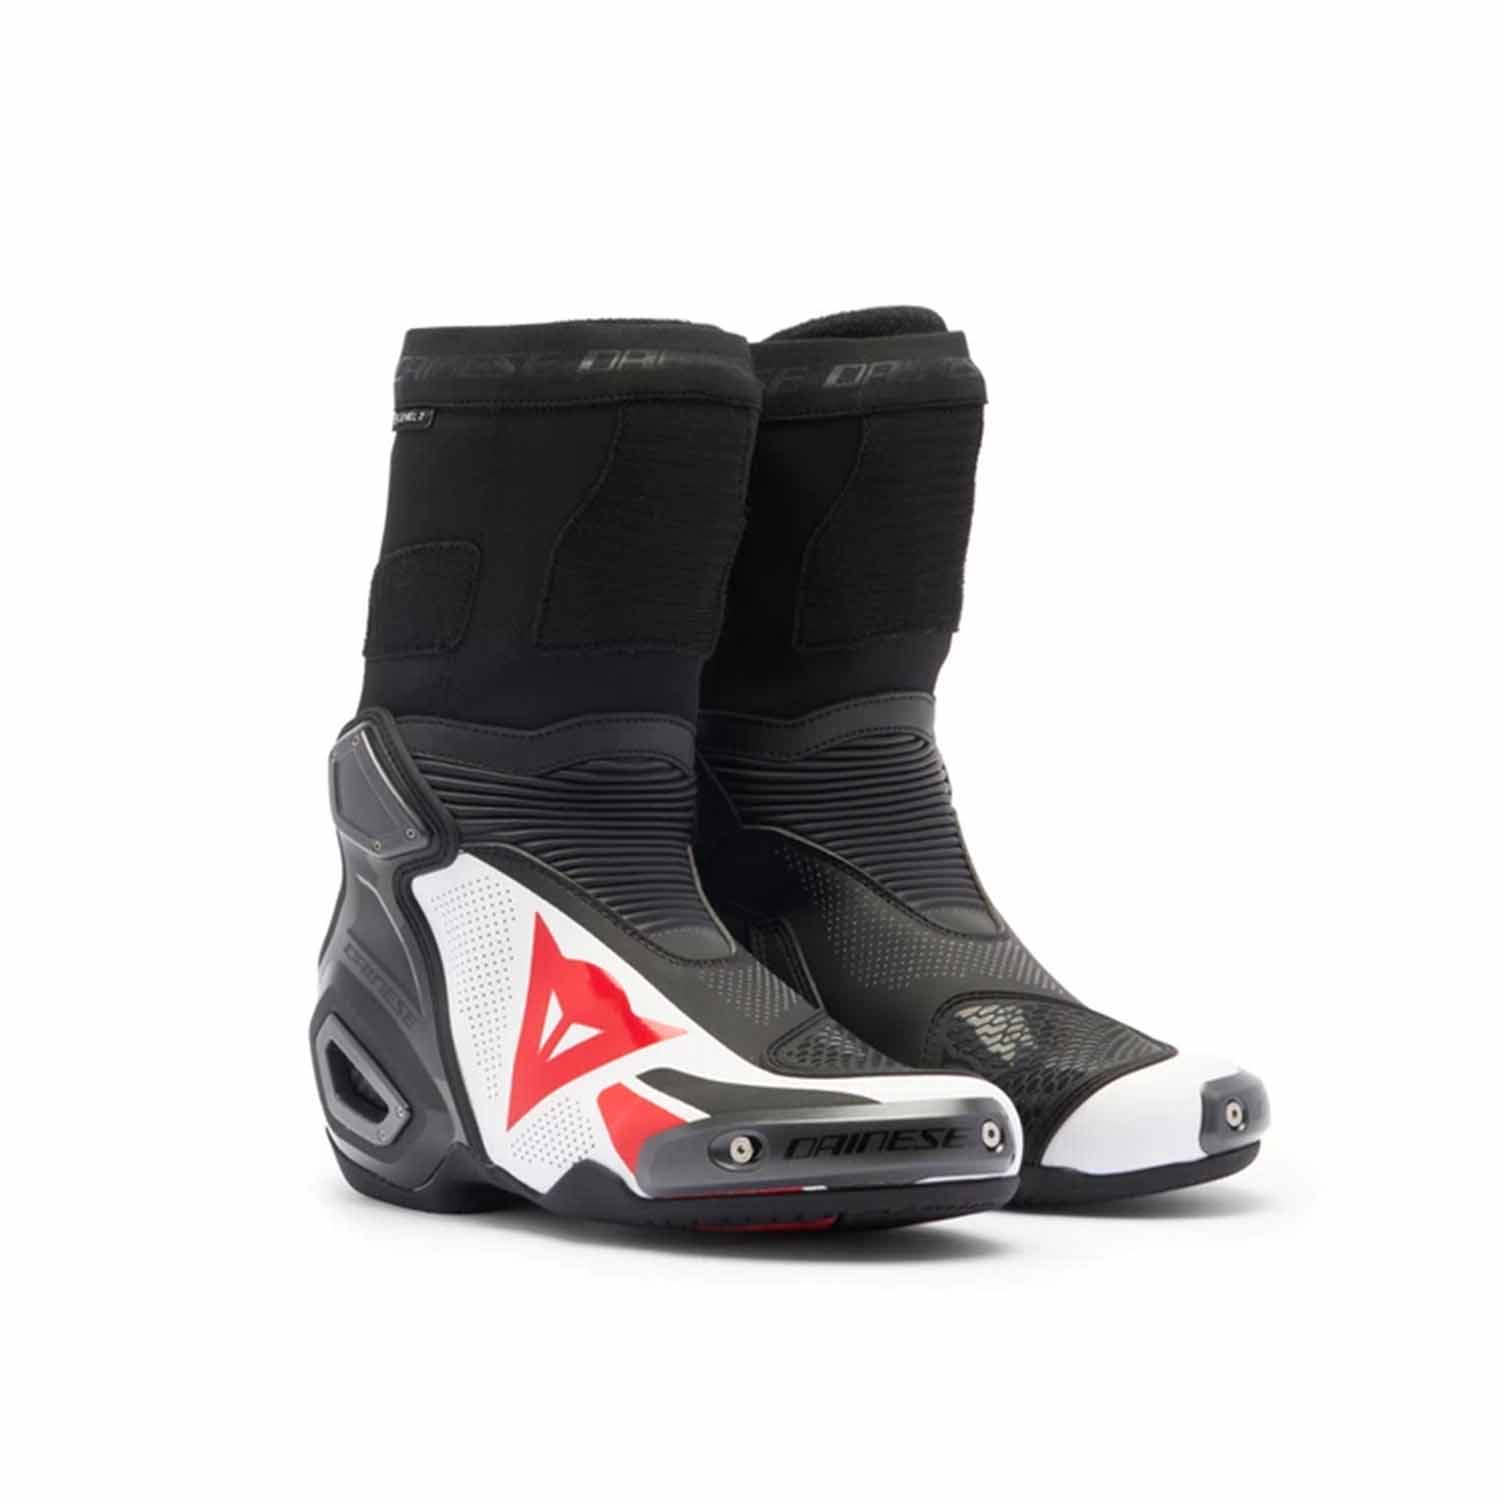 Image of EU Dainese Axial 2 Air Boots Black White Lava Red Taille 41